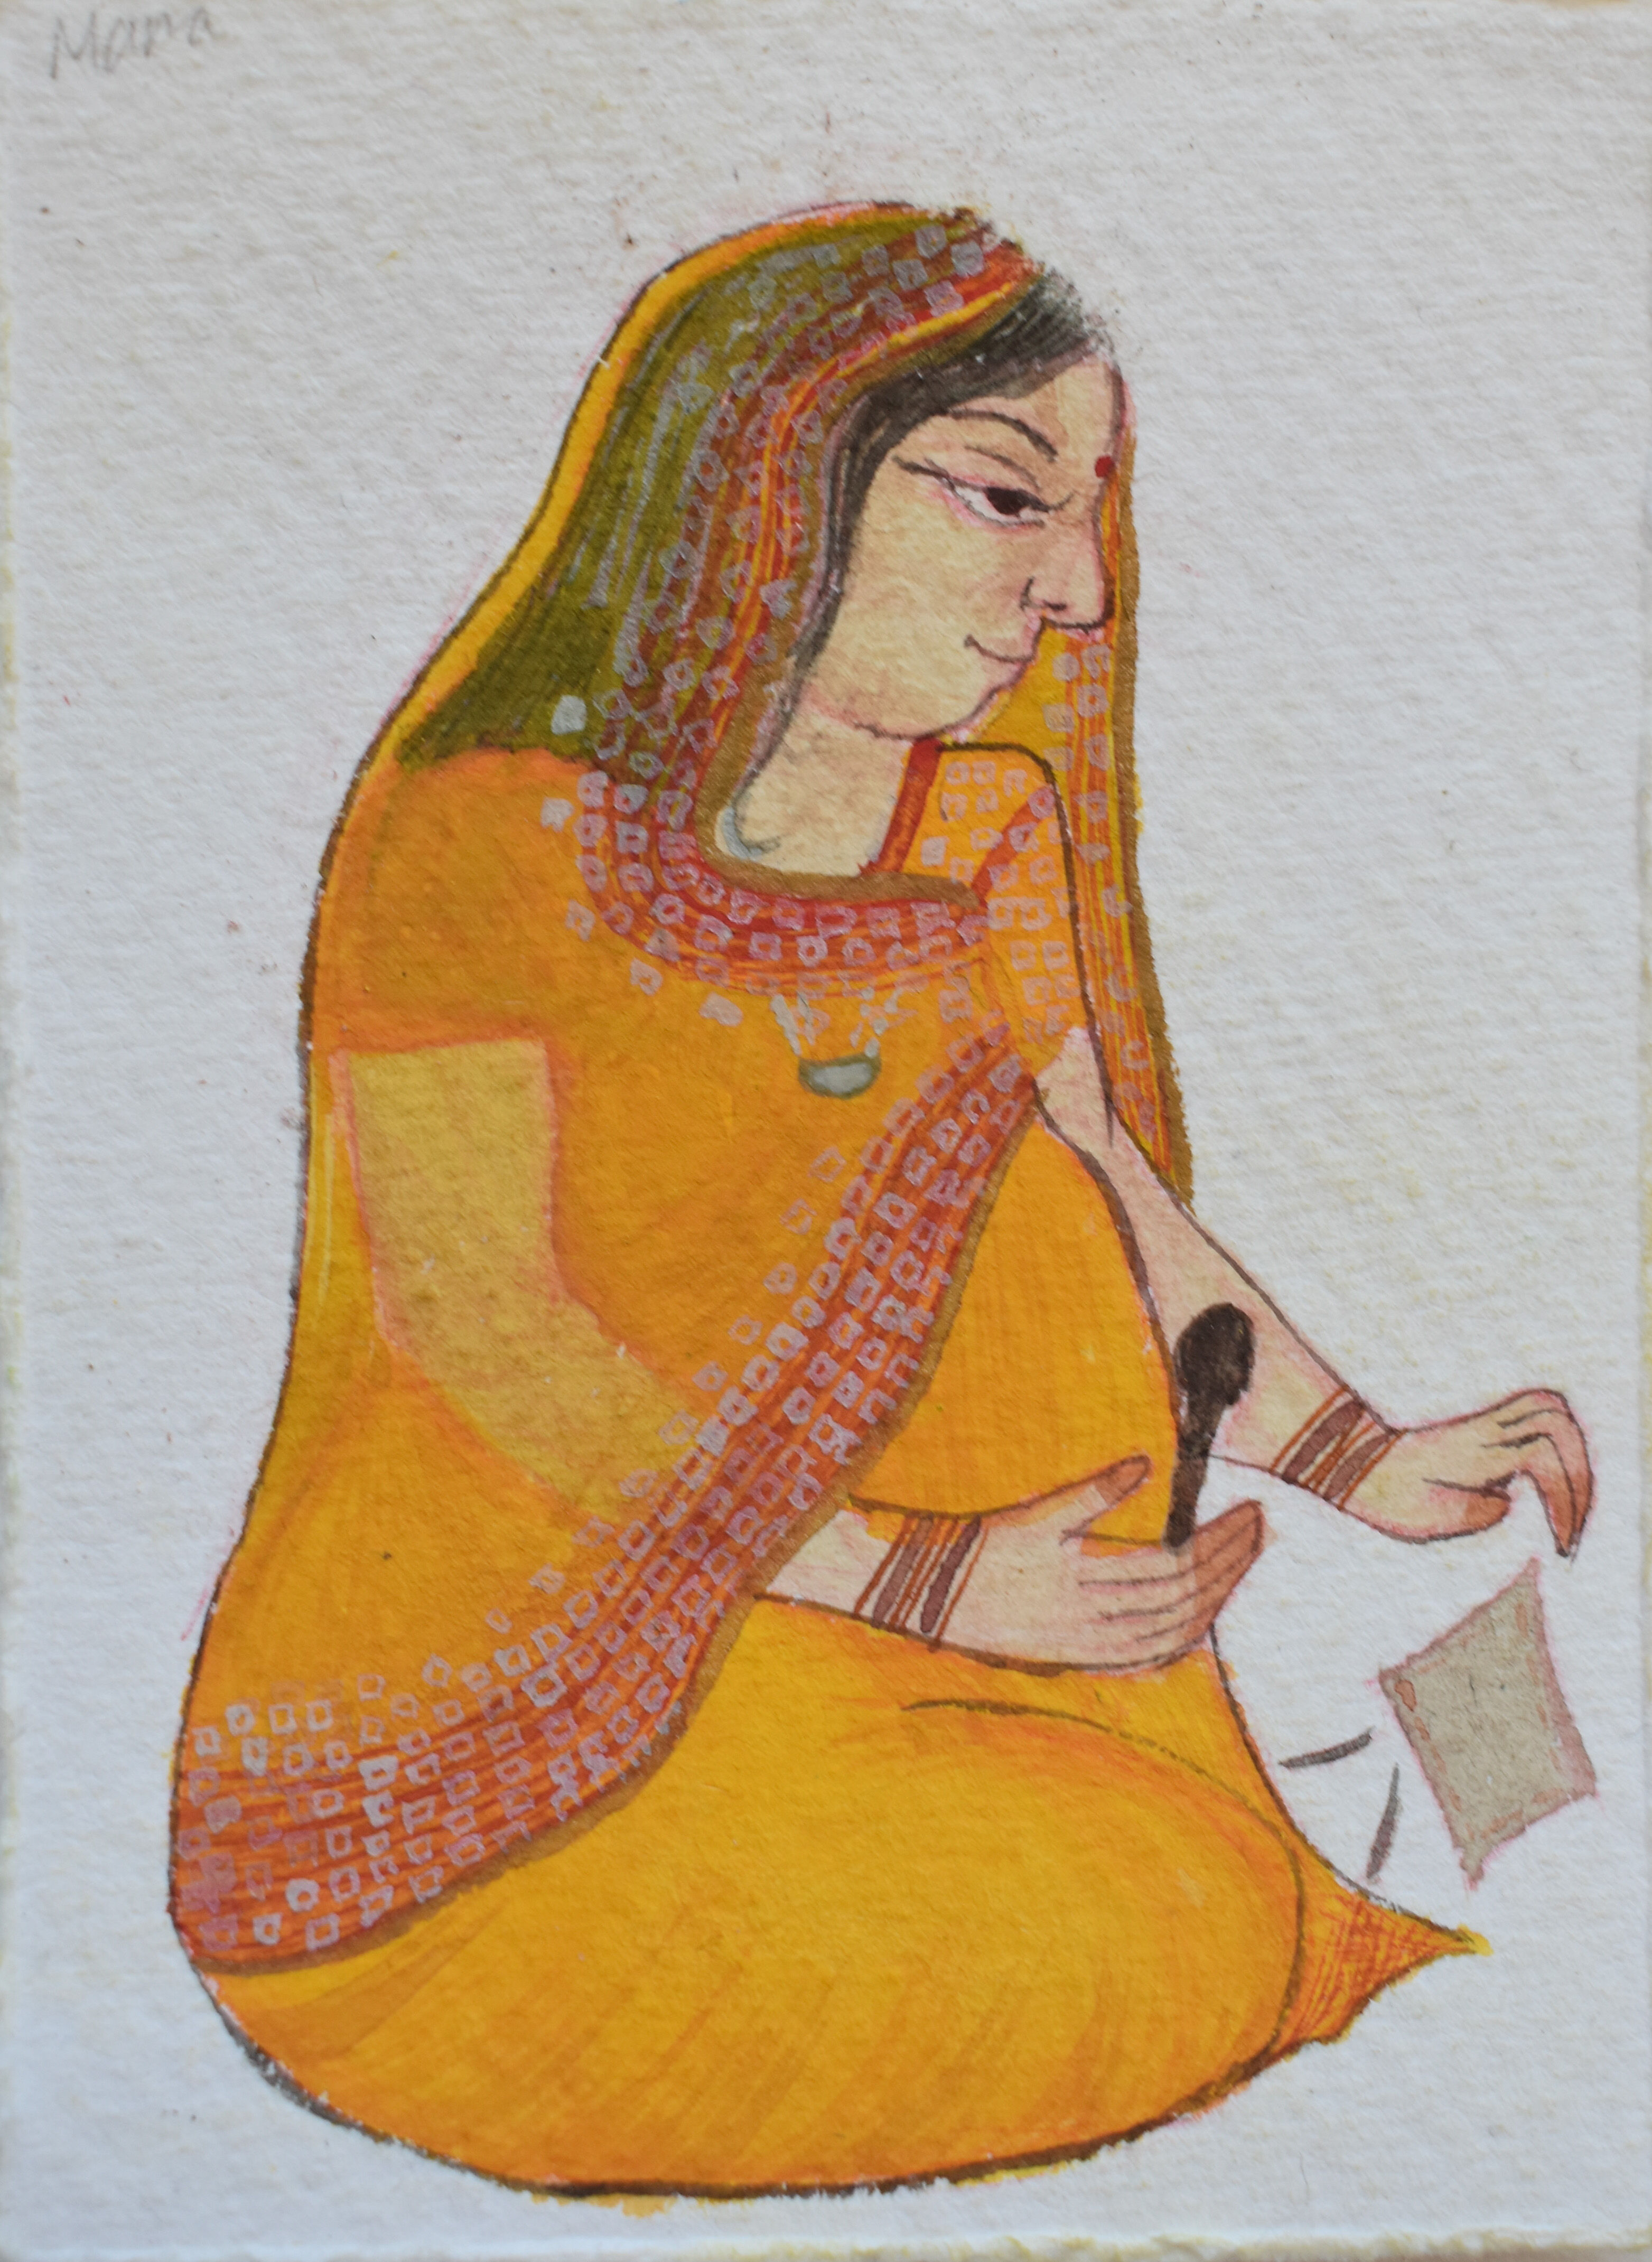 A serene portrait of an Indian woman in orange attire practicing the art of miniature painting.